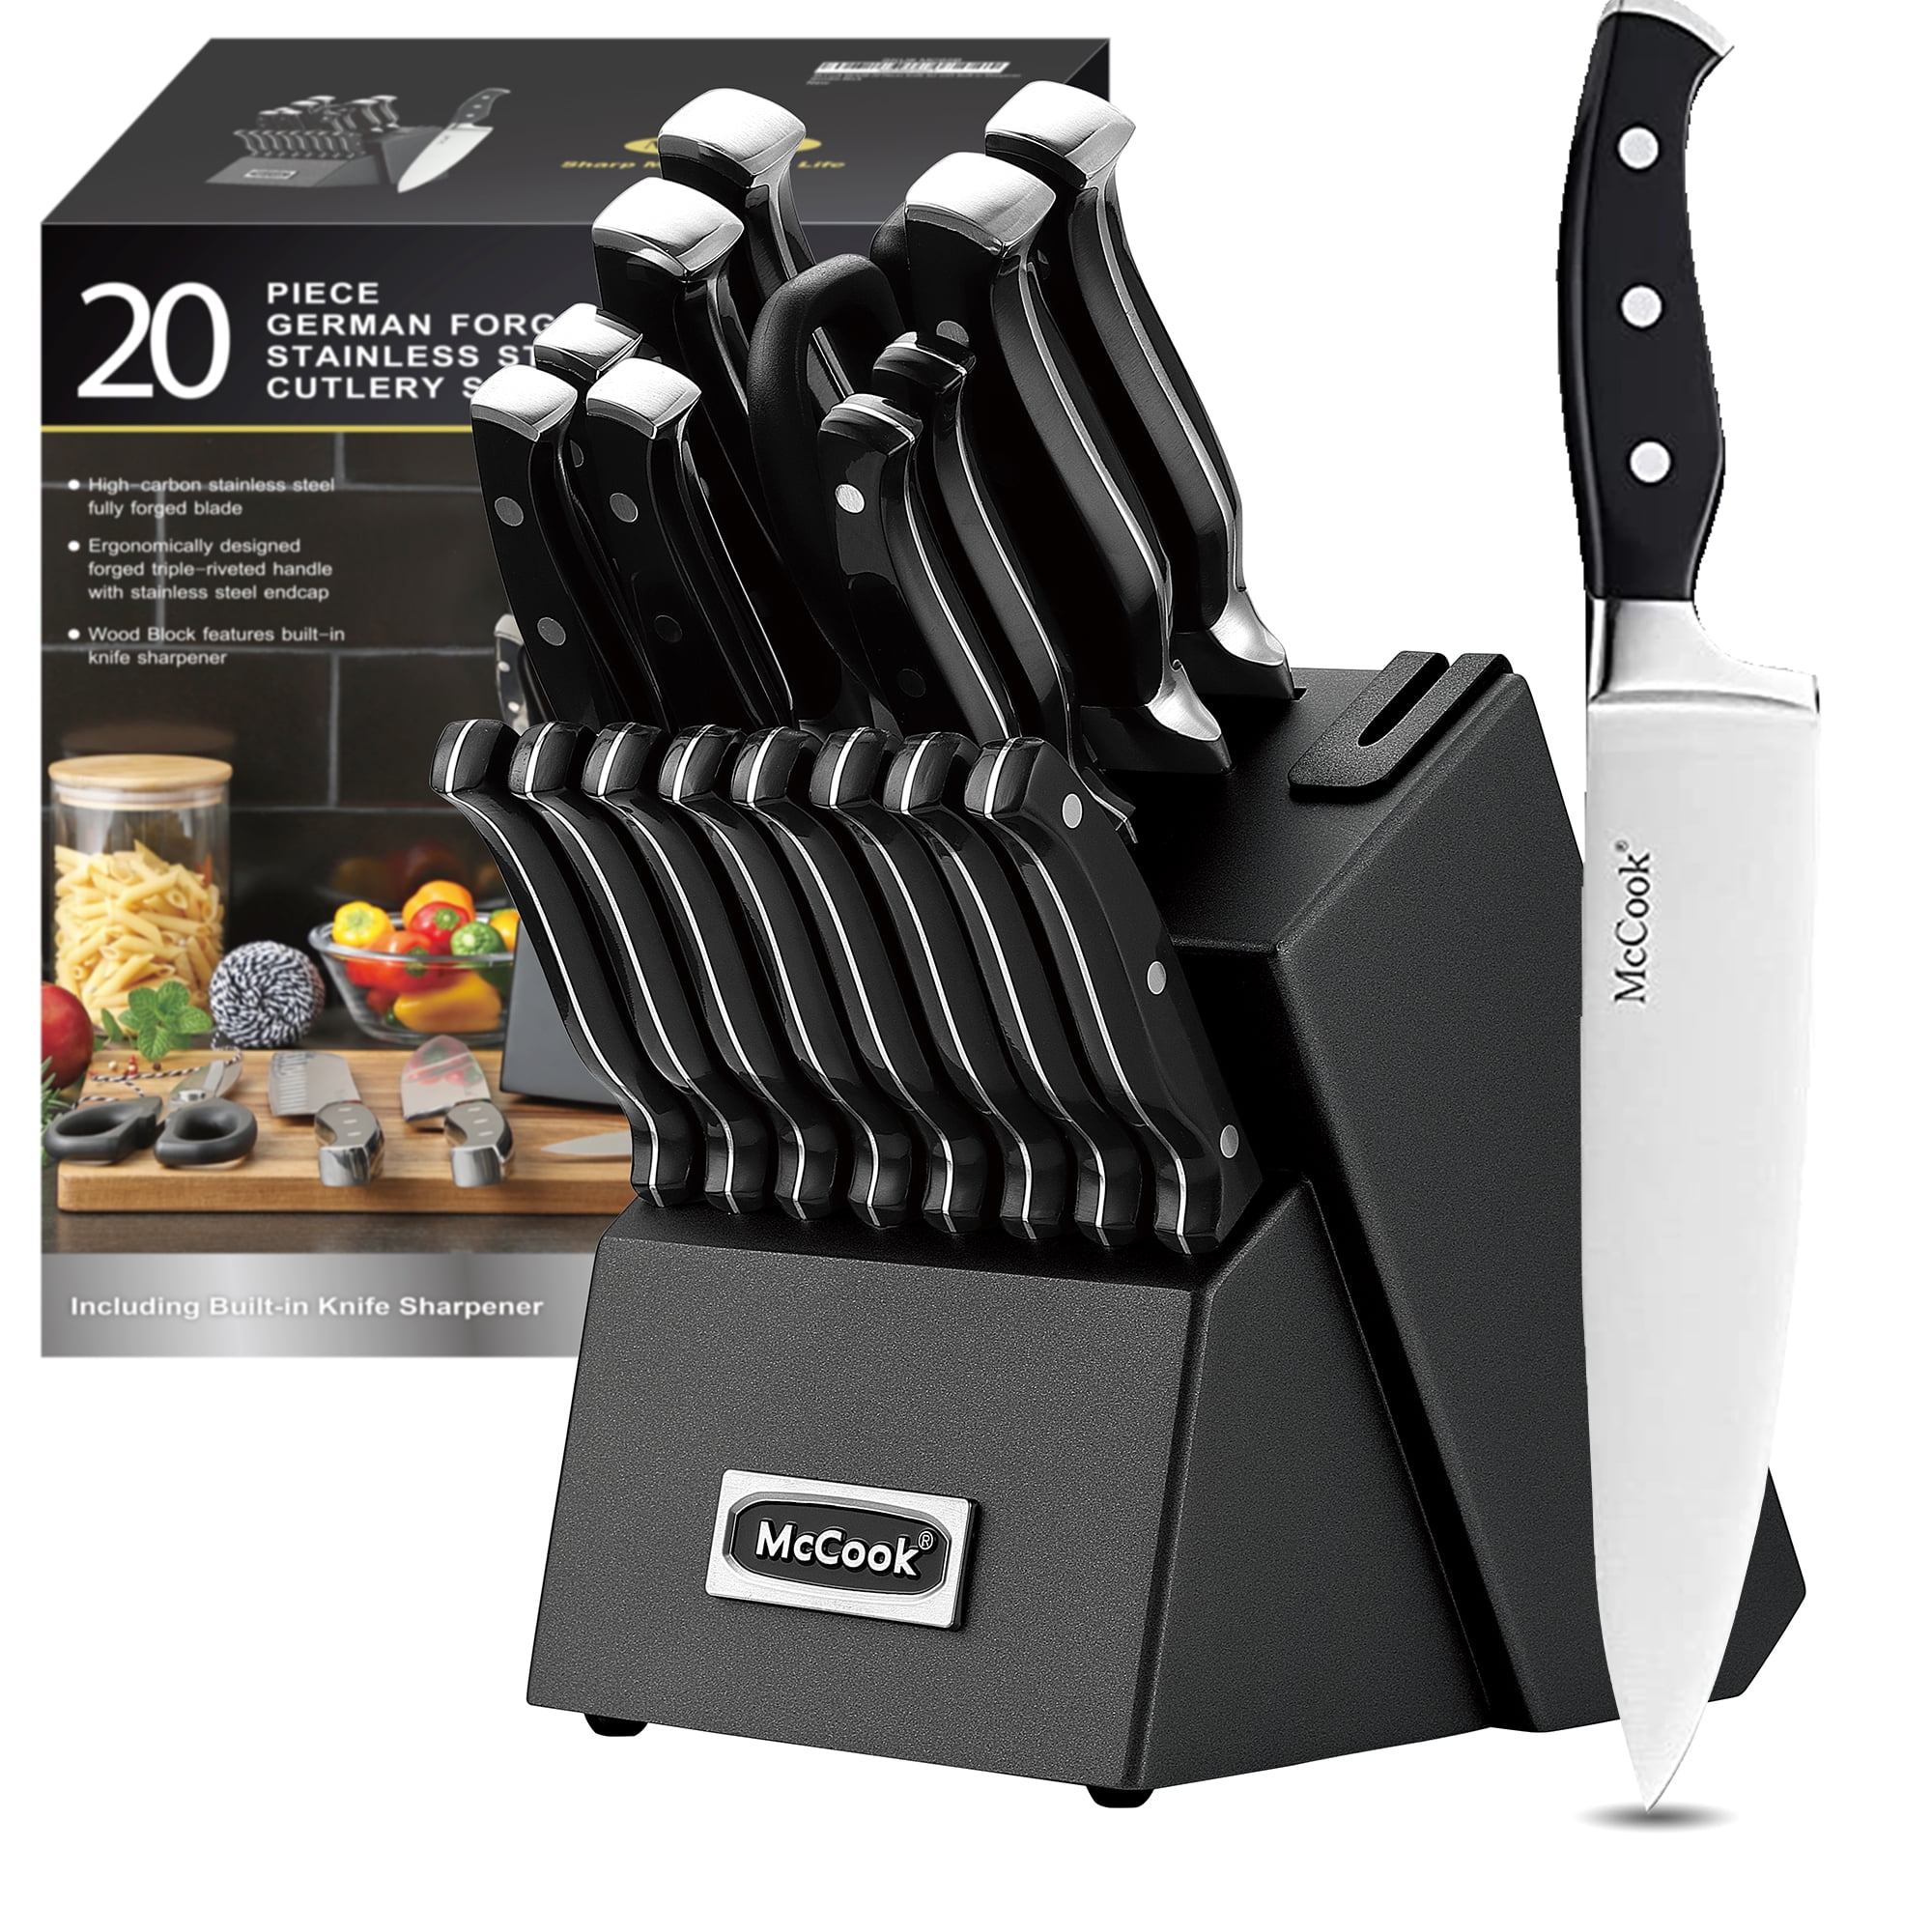 Knife Sets,McCook MC65B 20 Piece German Stainless Steel Forged Kitchen Knife  Block Set, Cutlery Set with Black Block 